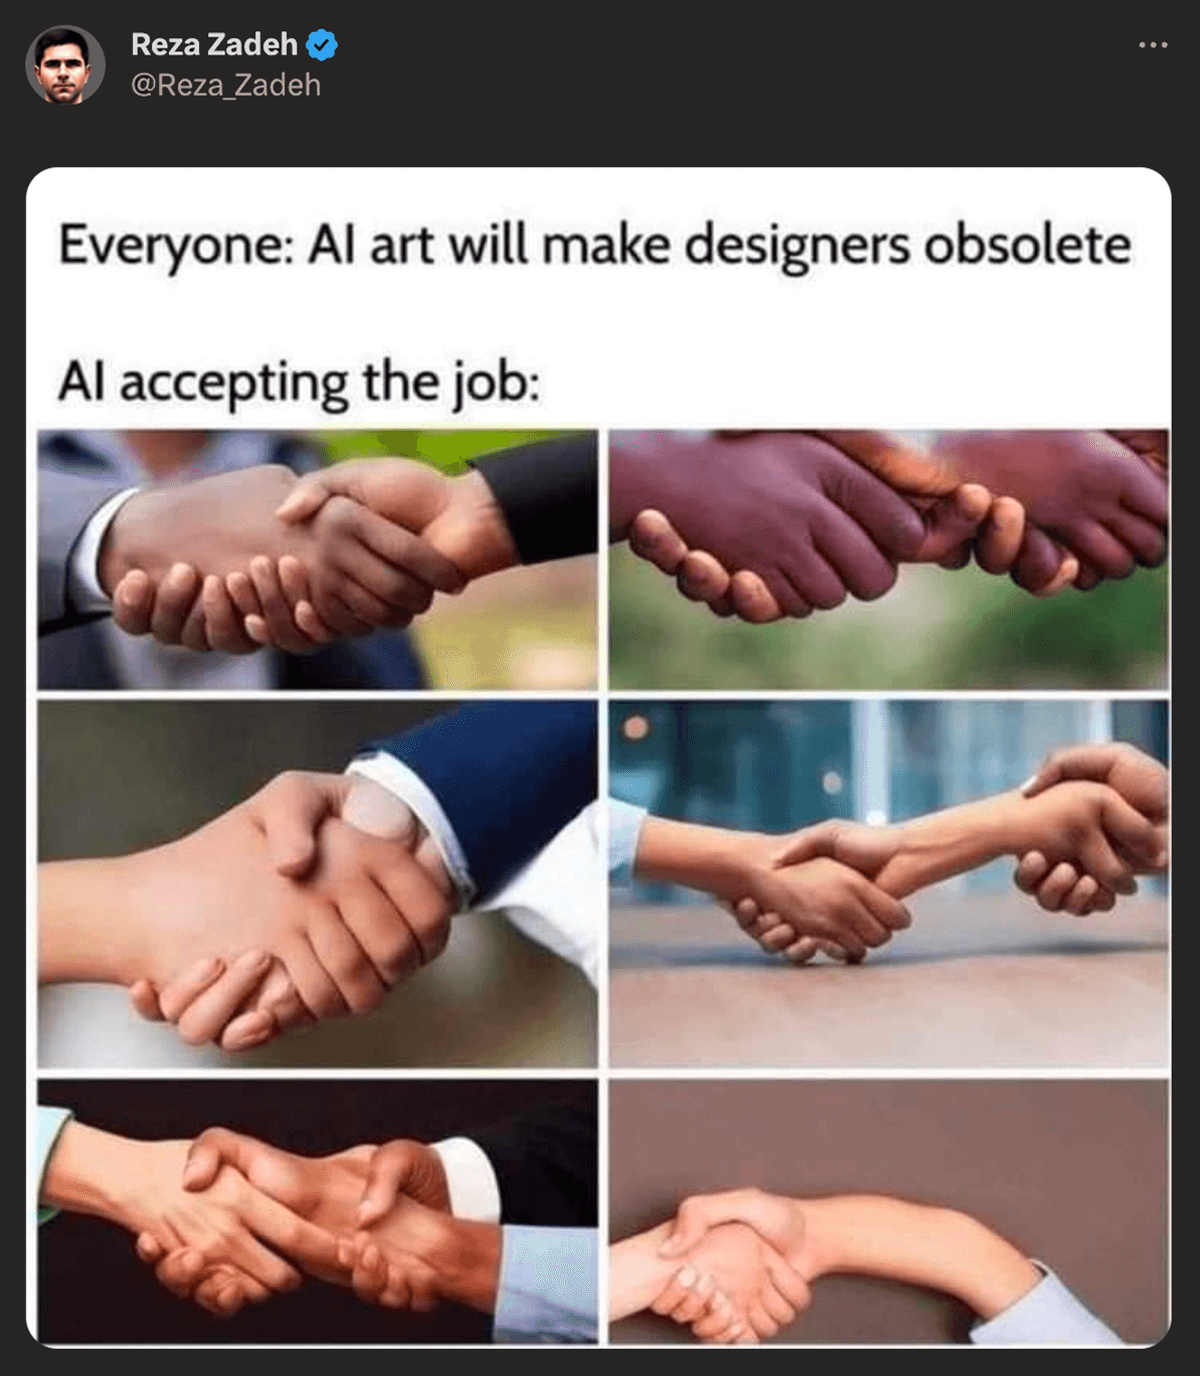 @Reza_Zadeh on twitter: Everyone: AI art will make designers obsolete. Al accepting the job: AI created images of handshakes. They are very bad.